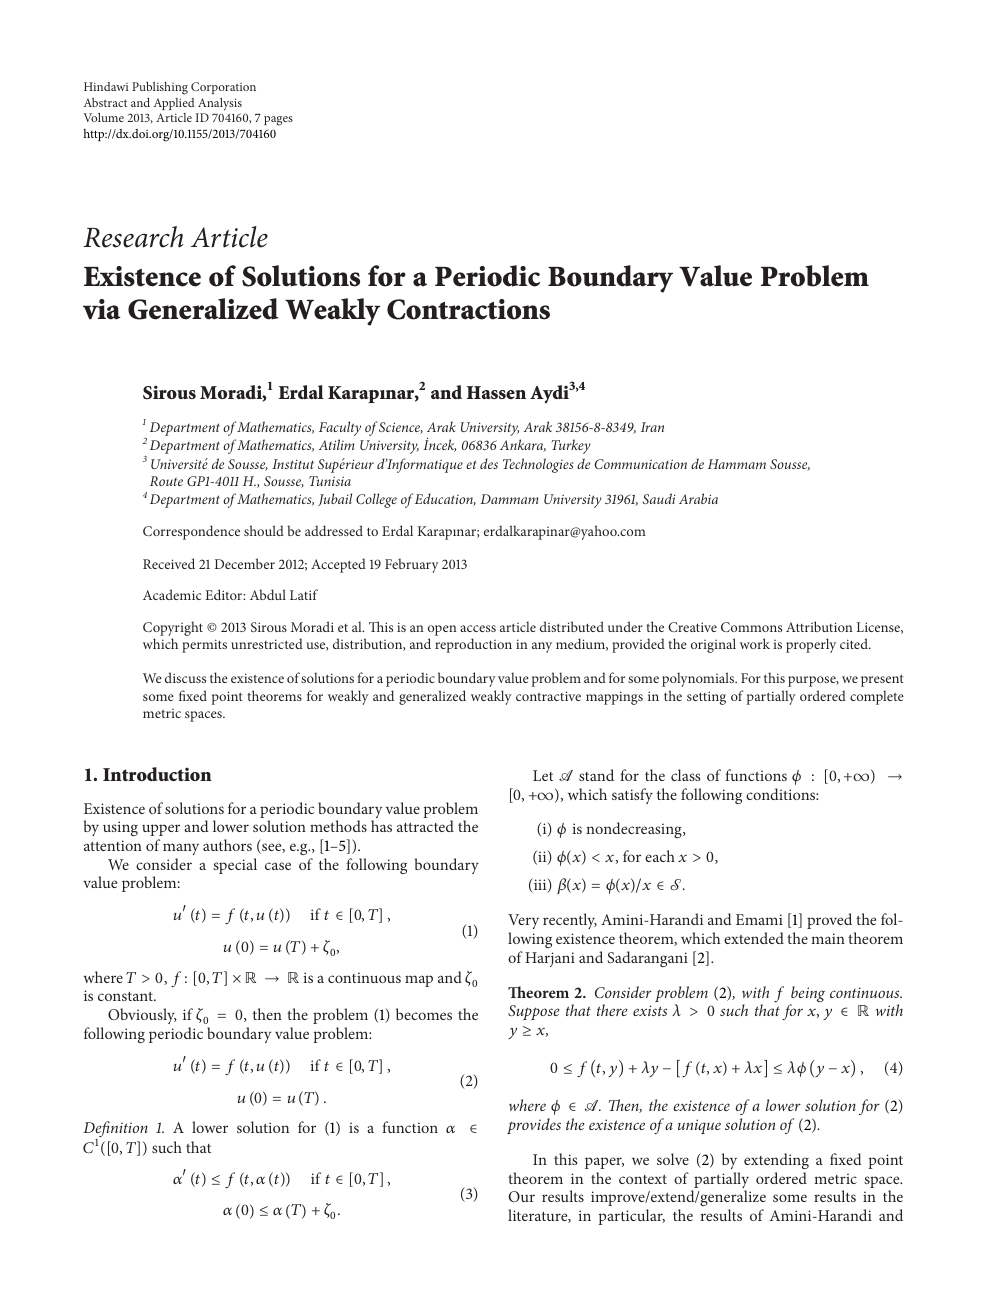 Existence Of Solutions For A Periodic Boundary Value Problem Via Generalized Weakly Contractions Topic Of Research Paper In Mathematics Download Scholarly Article Pdf And Read For Free On Cyberleninka Open Science